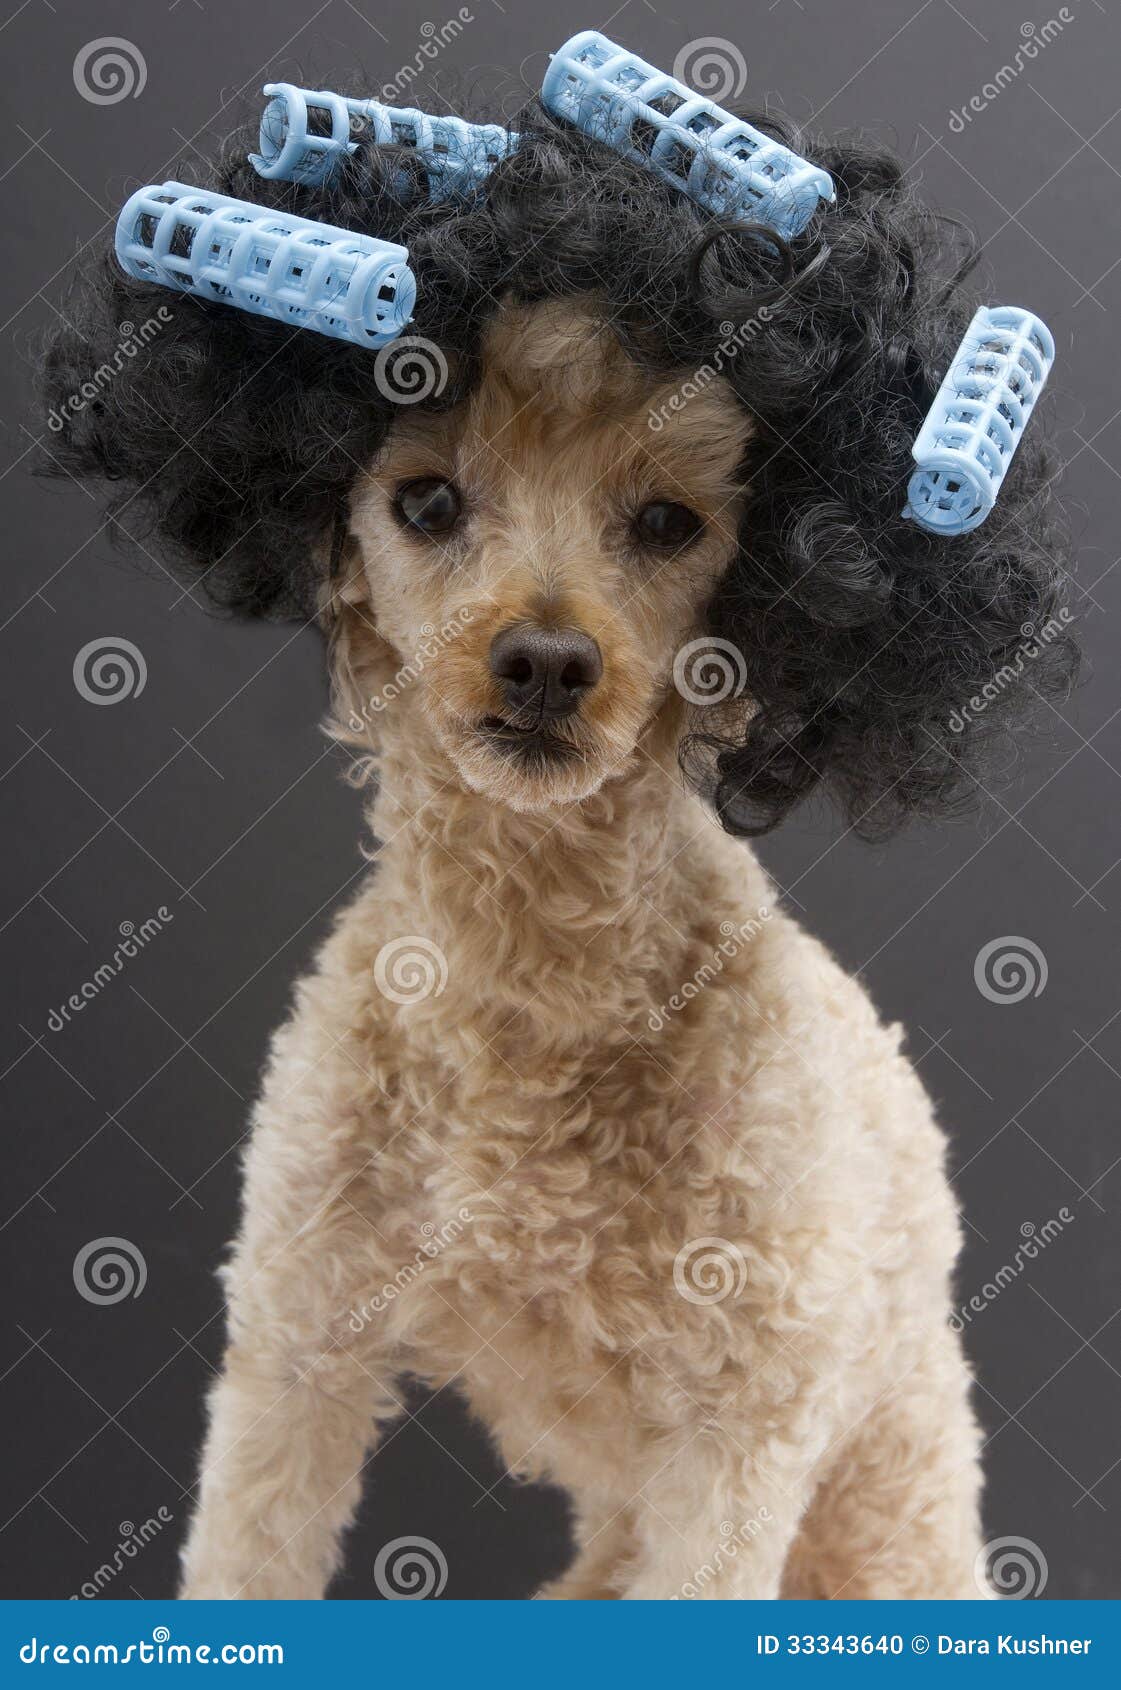 Blue Curlers And Big Hair On Little Poodle Stock Photo 